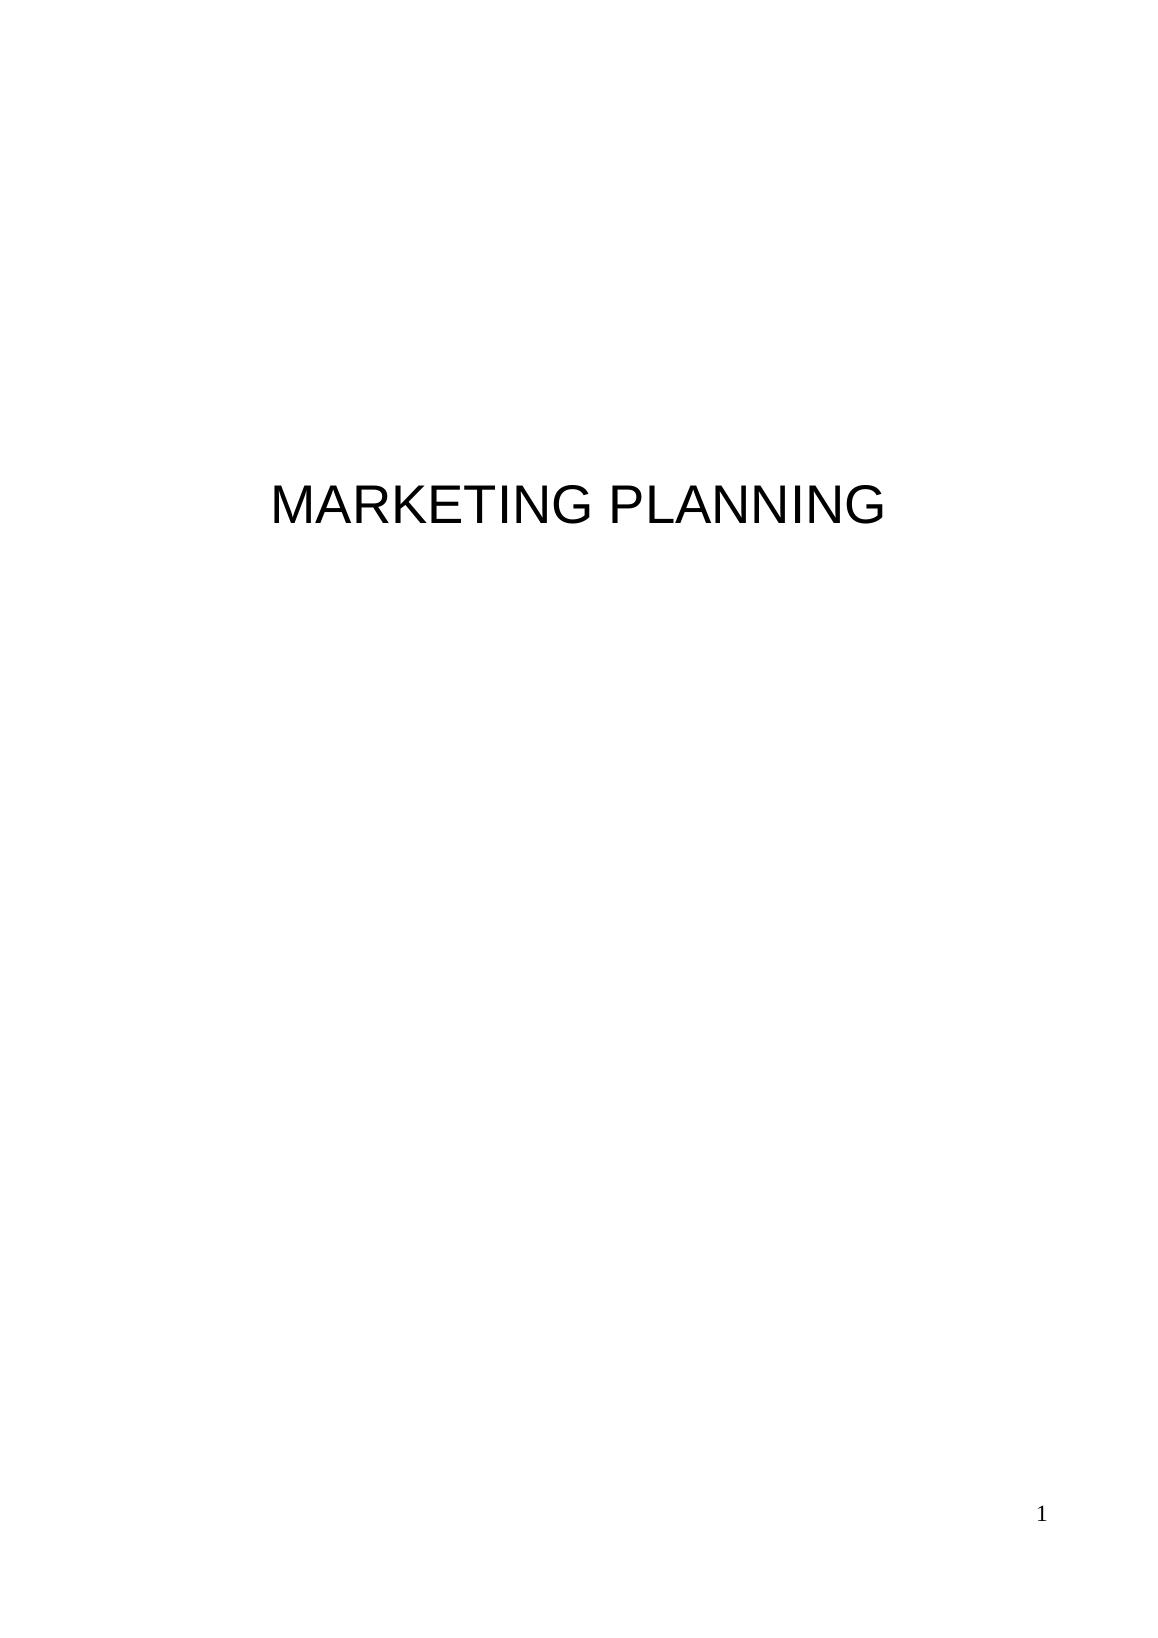 Market Research Report on Marketing Planning Planification TABLE OF CONTENTS_1